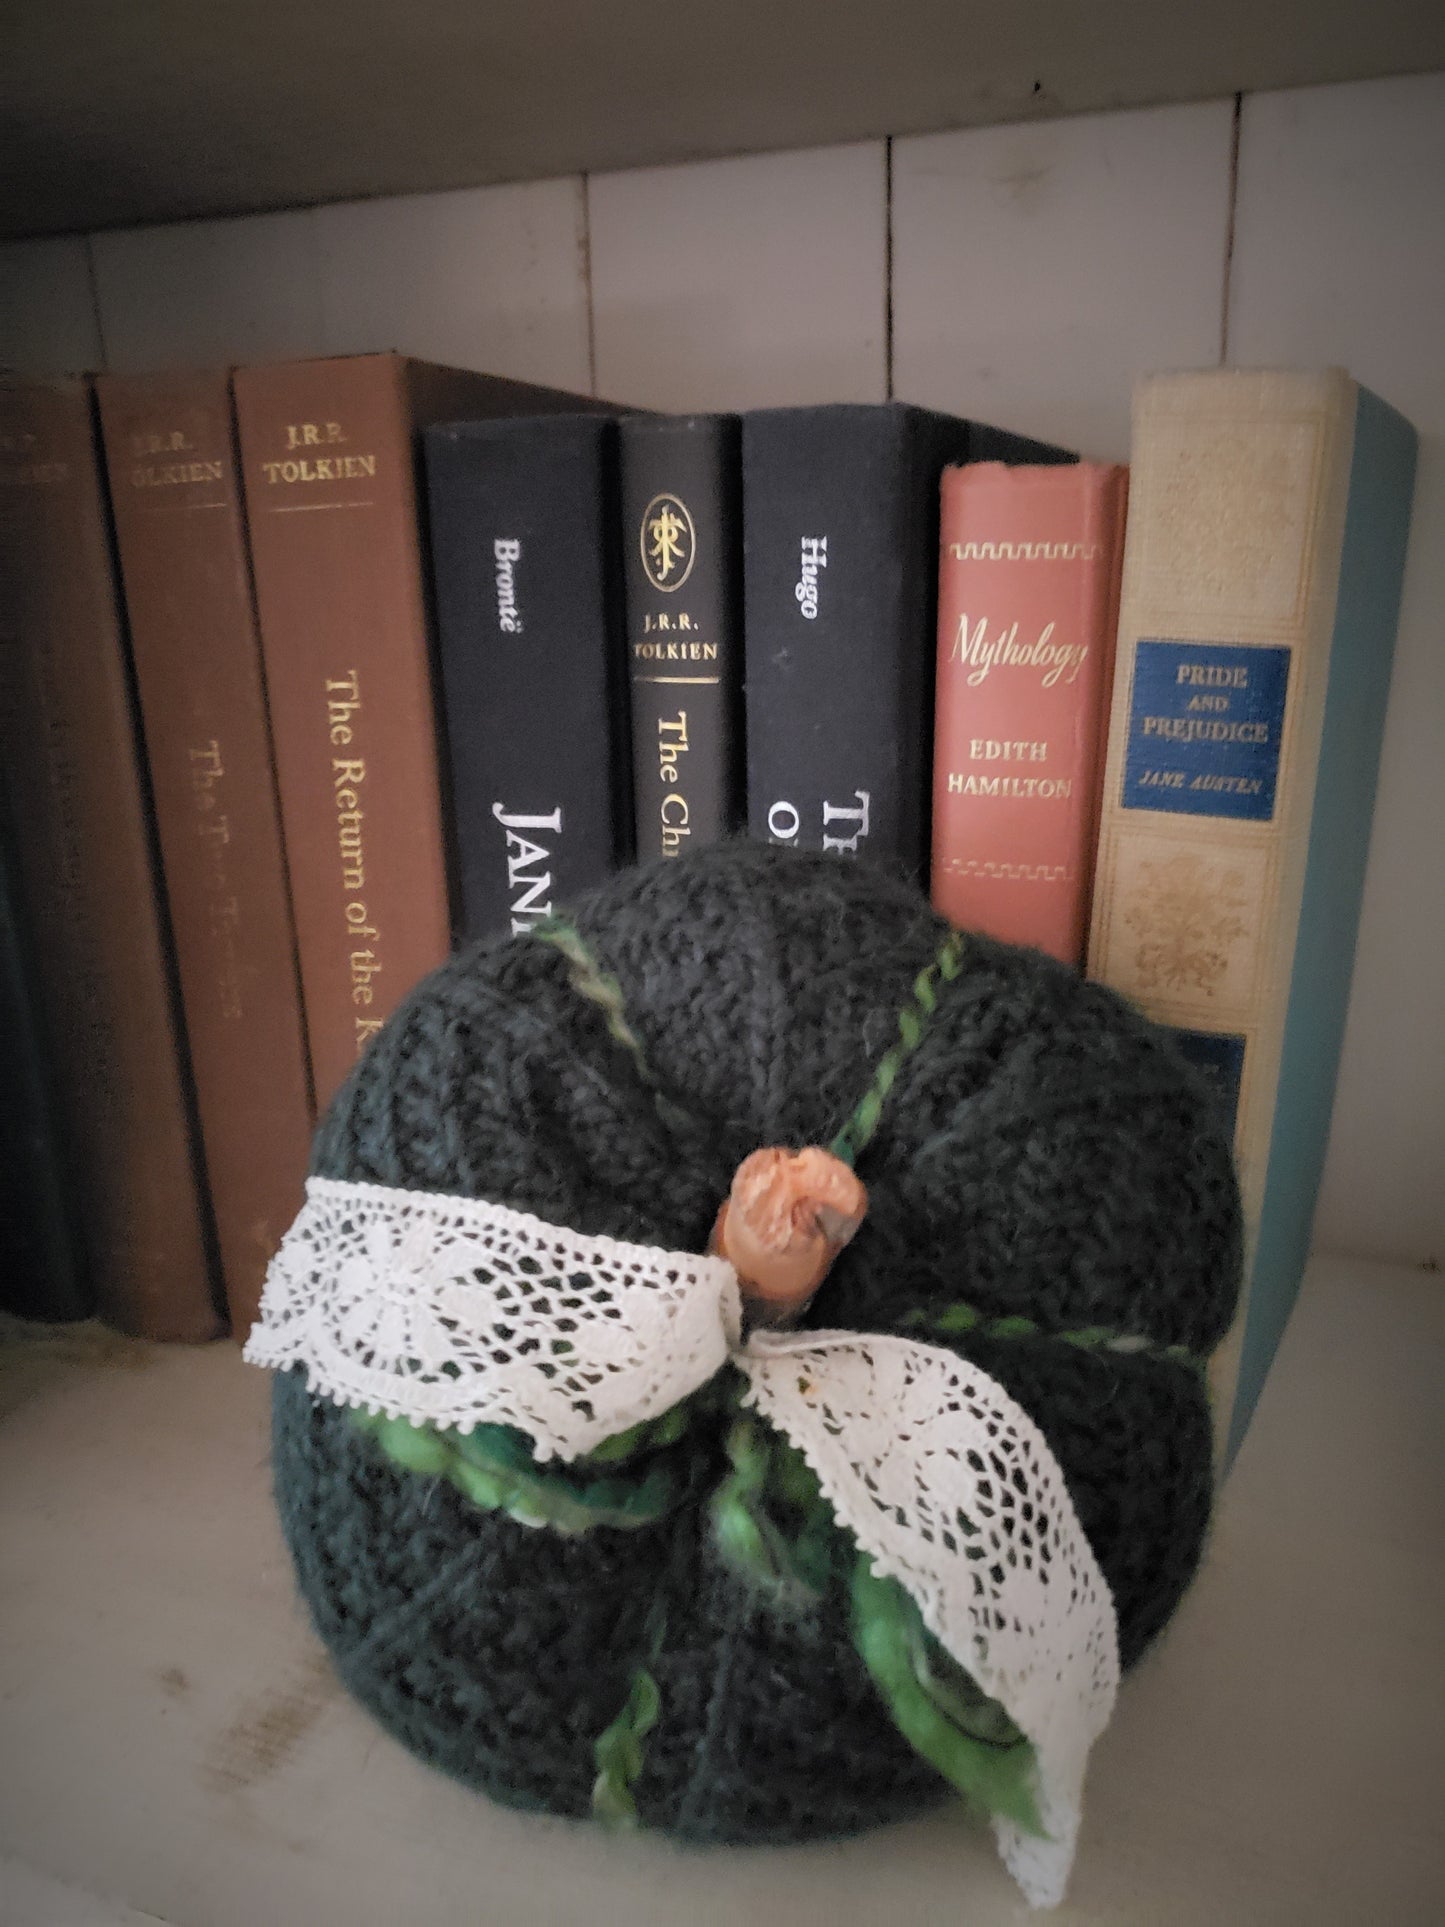 Green Knit Pumpkin PIllow Pouf with Vintage Lace and Wooden Stem